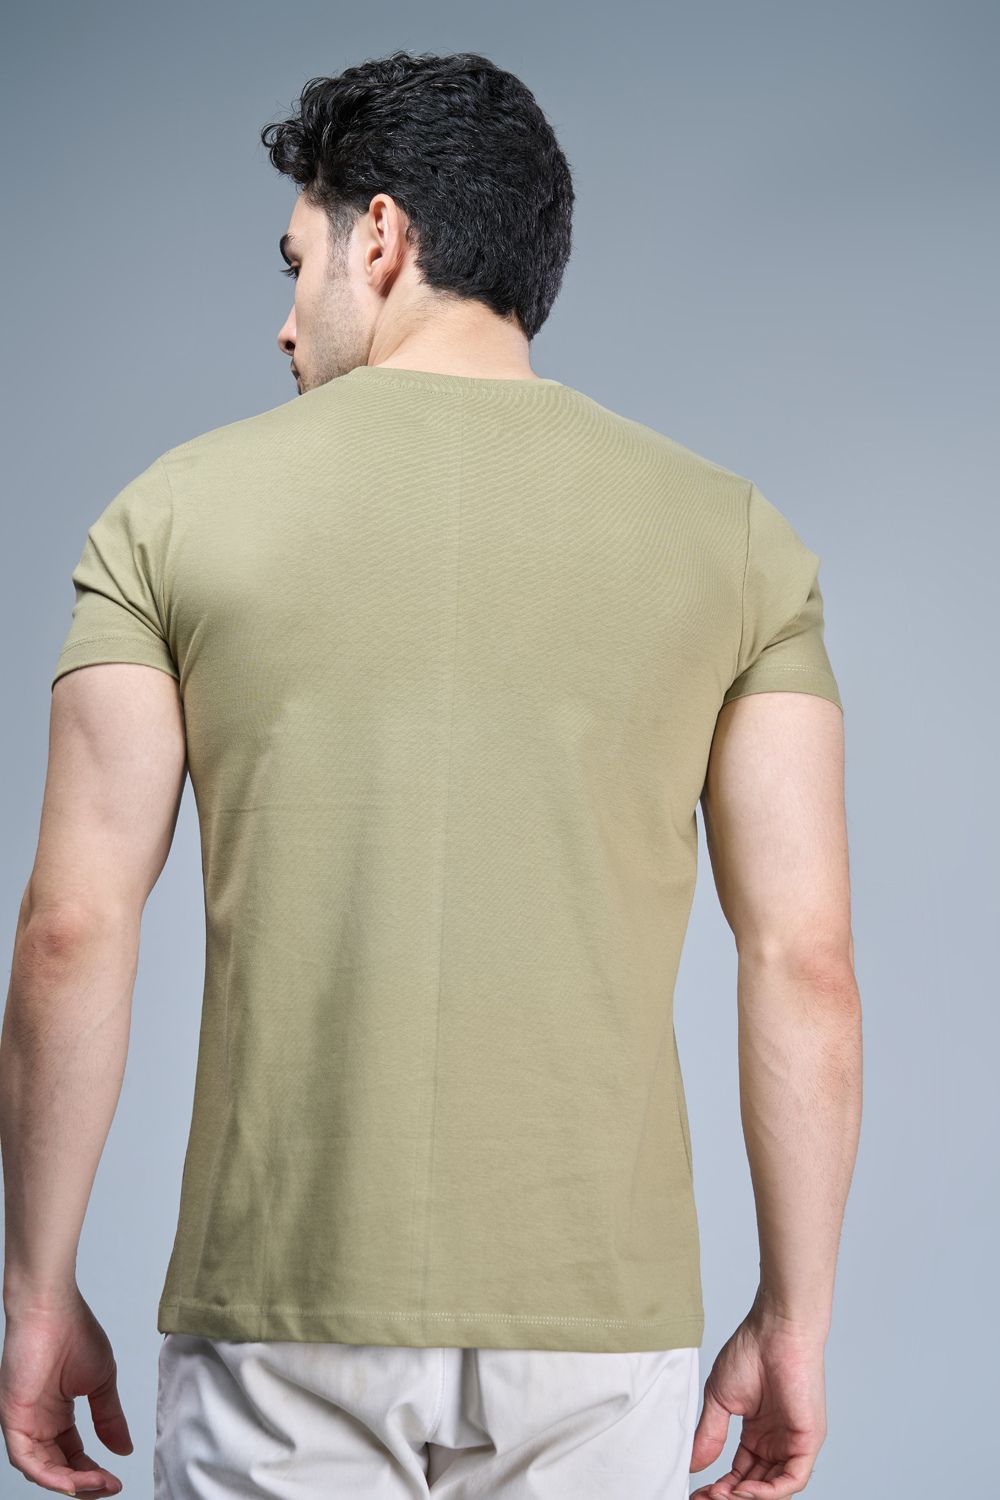 Olive Green colored, cotton Graphic T shirt for men, half sleeves and round neck, back view.